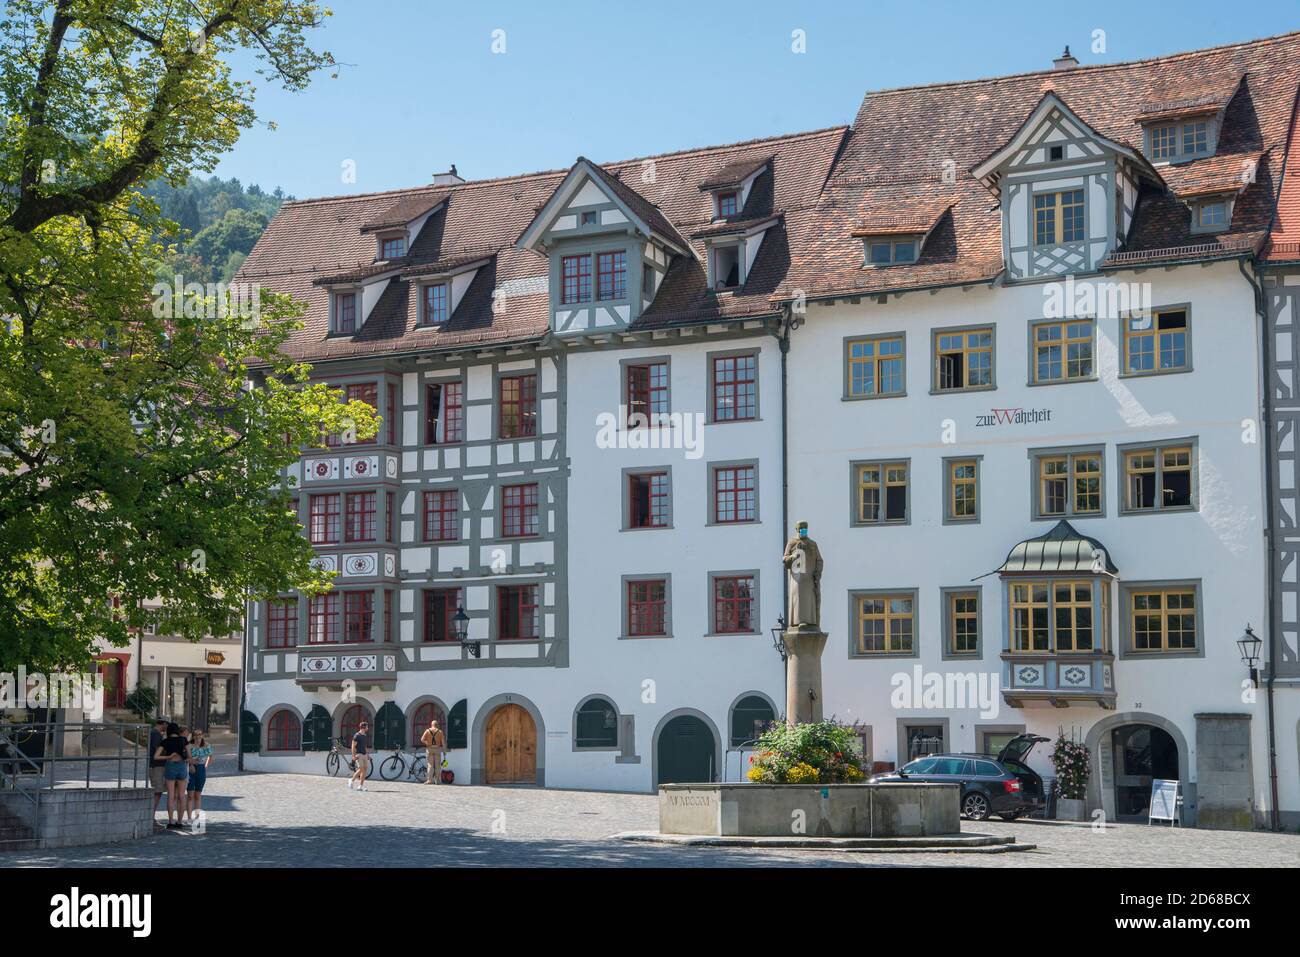 Gallus square in Old town of St. Gallen, Switzerland Stock Photo